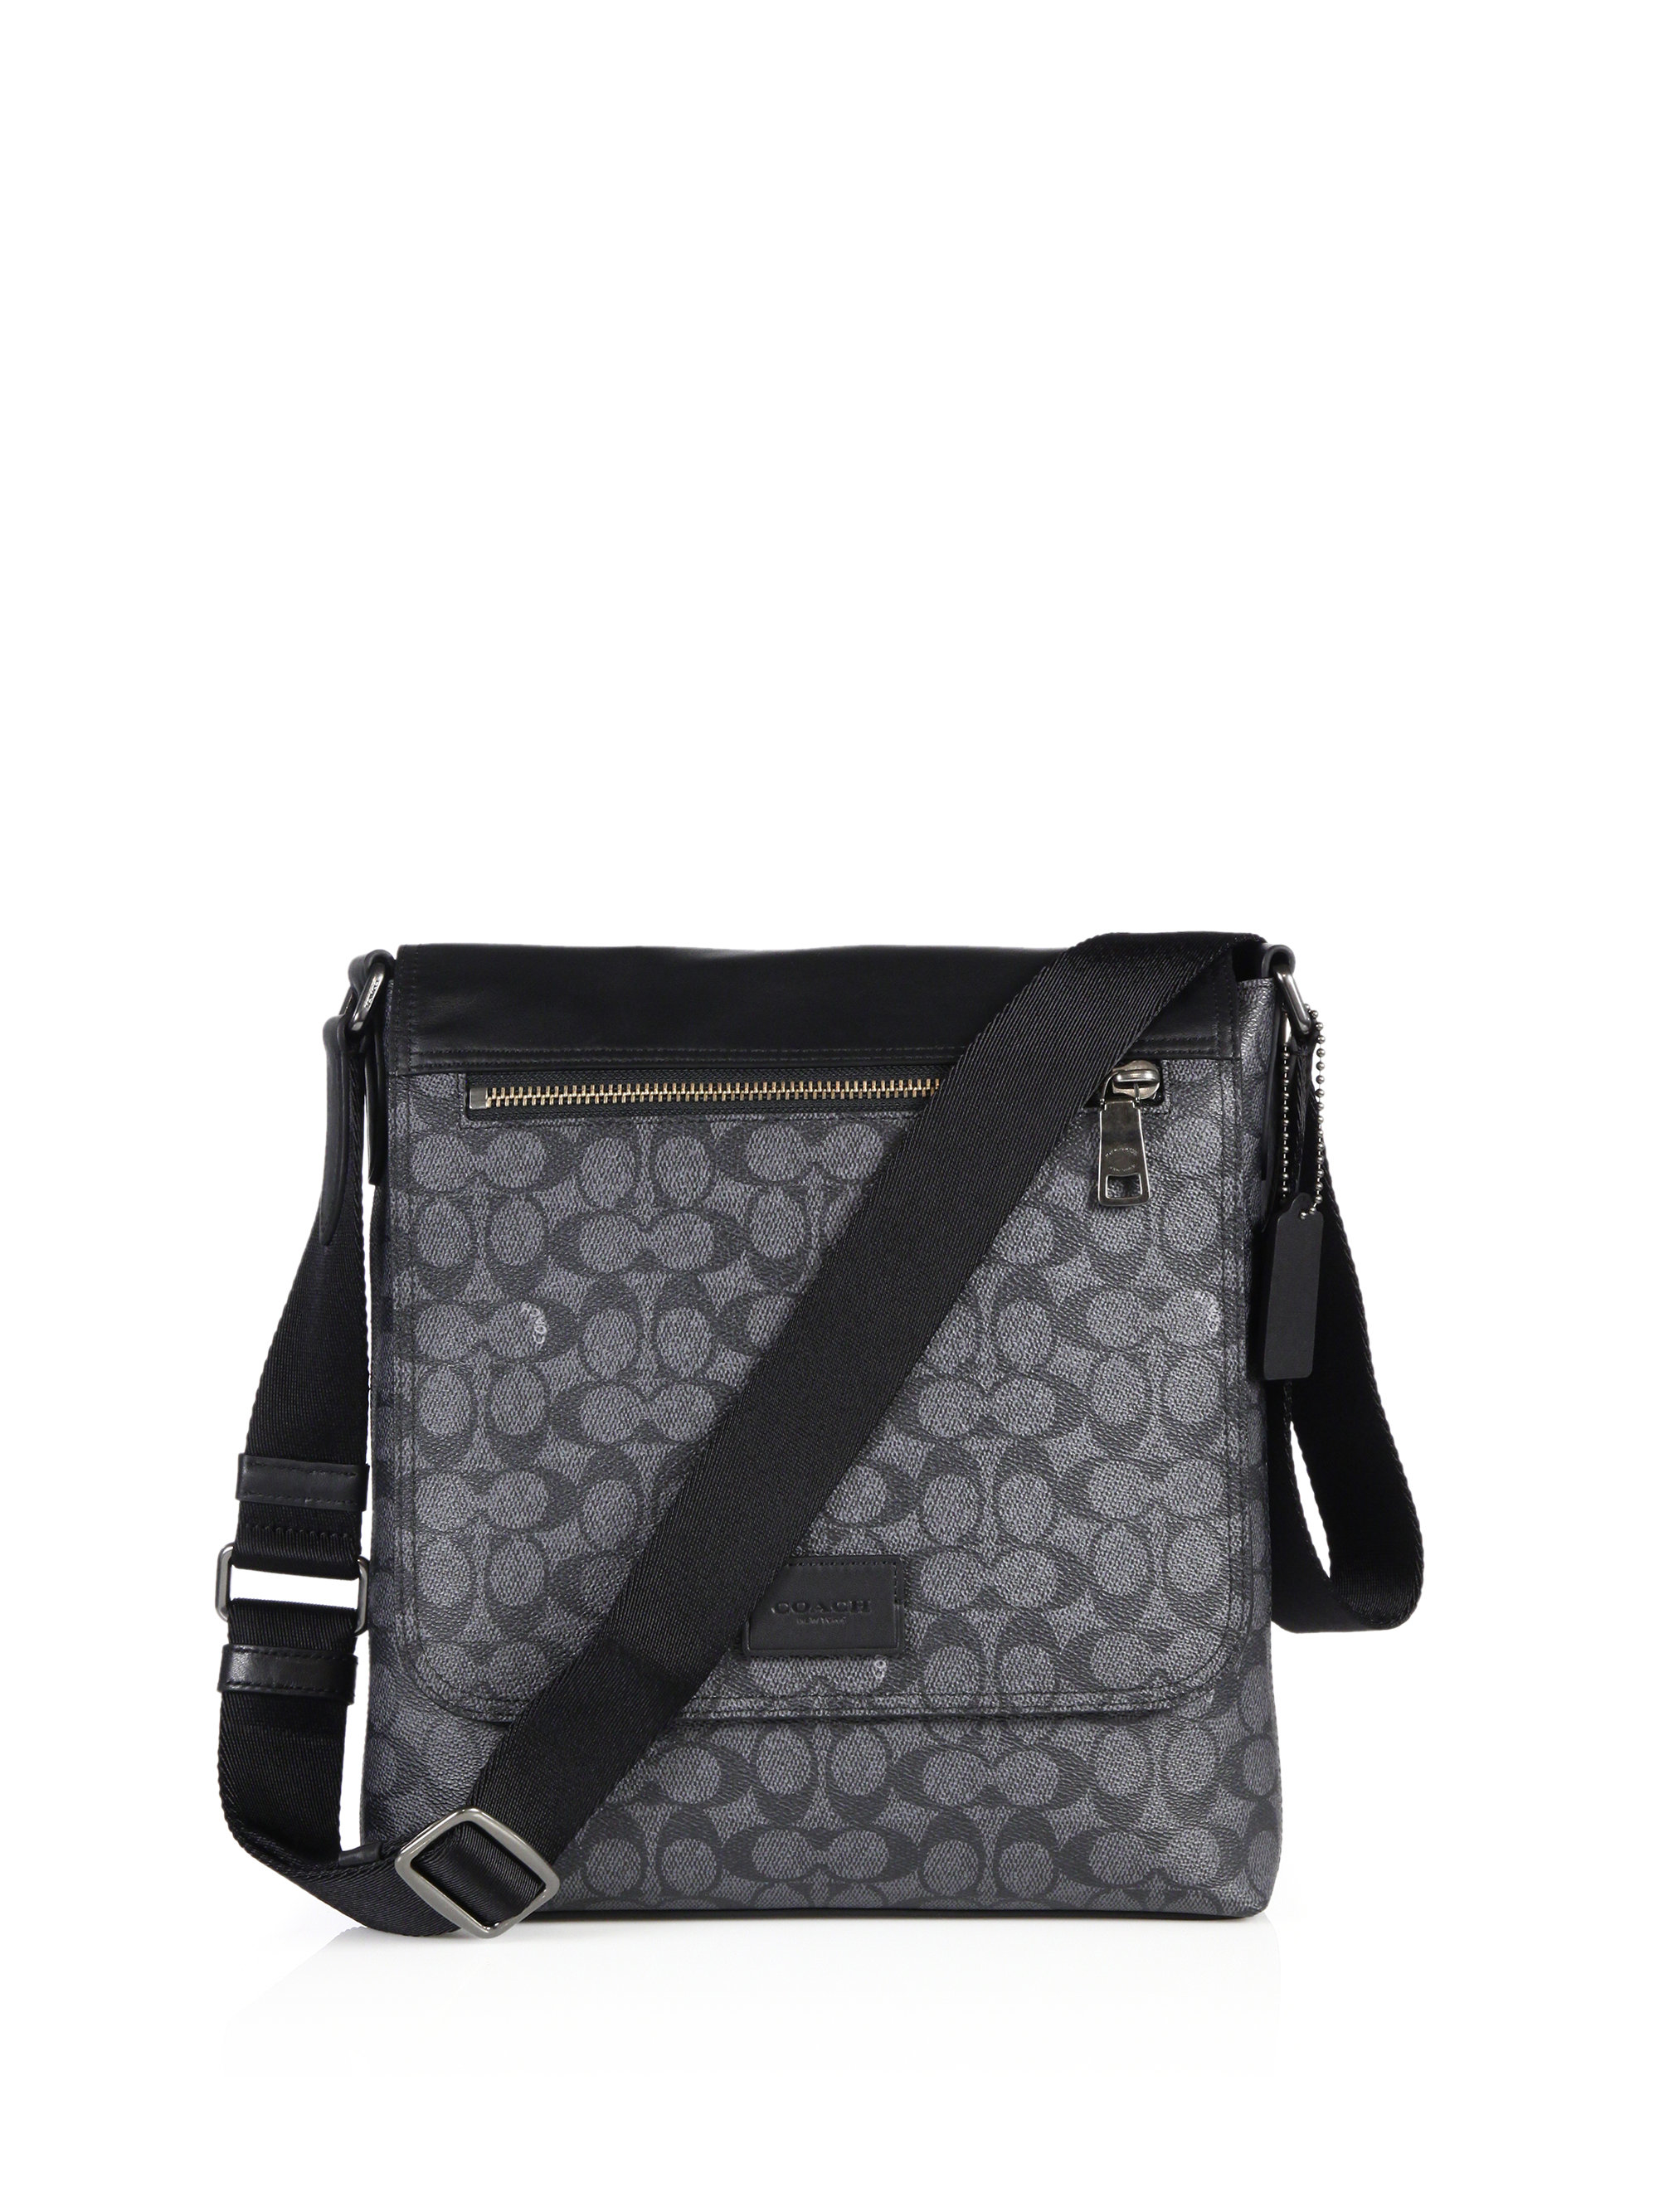 COACH Sam Leather-trimmed Coated Canvas Crossbody Bag in Black-Charcoal (Black) for Men - Lyst